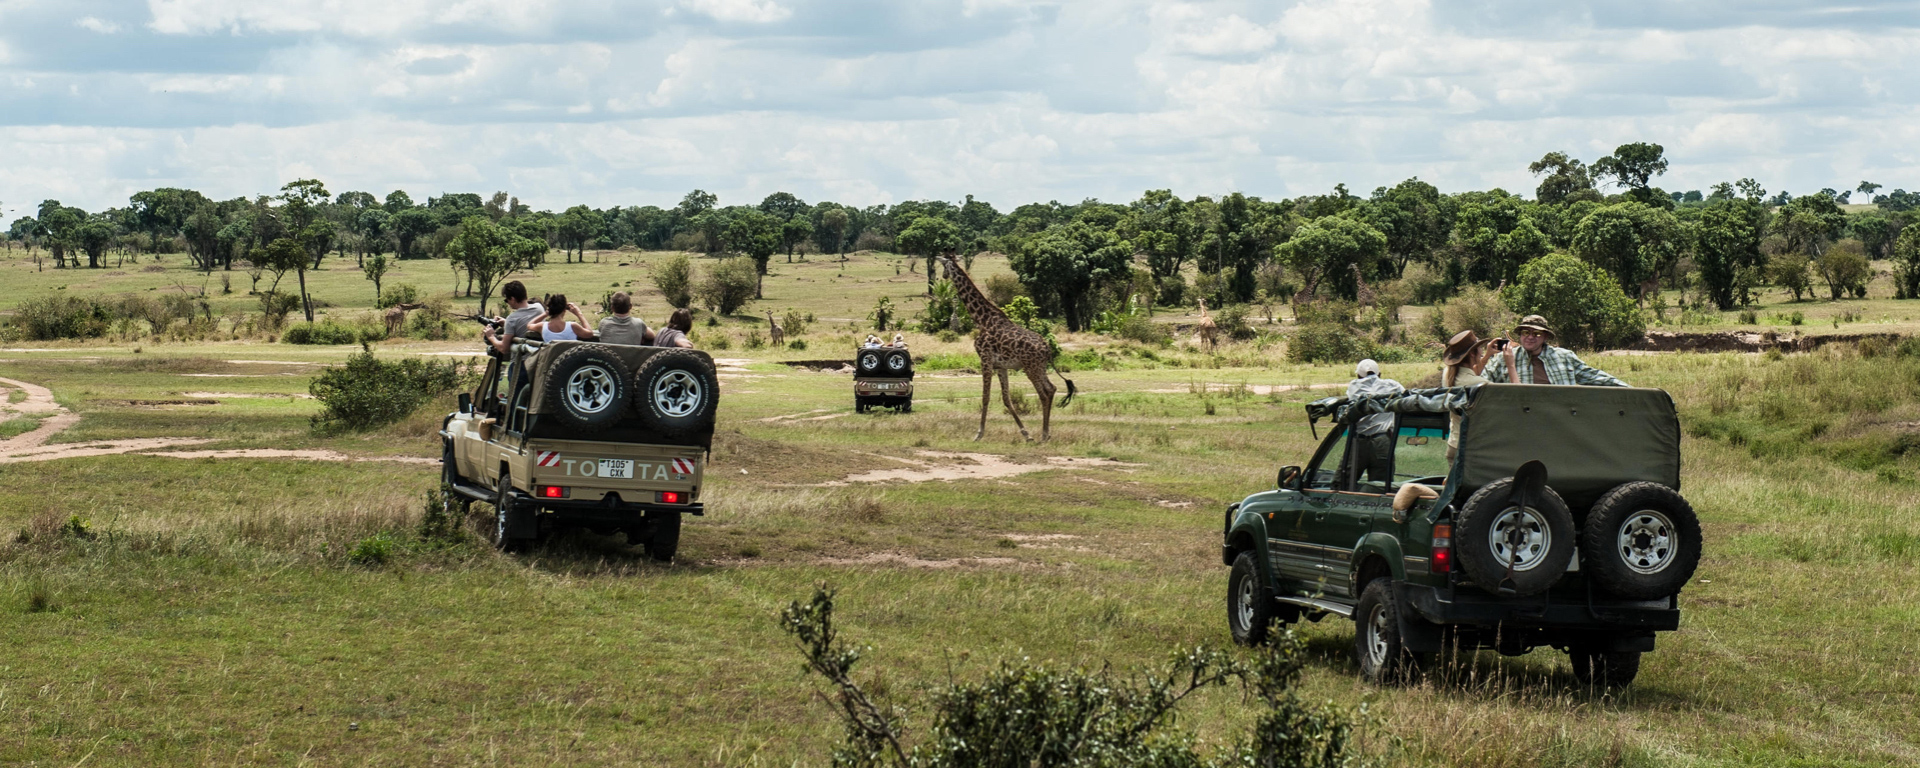 Top 6 Travel Tips For Planning A Last-Minute Safari